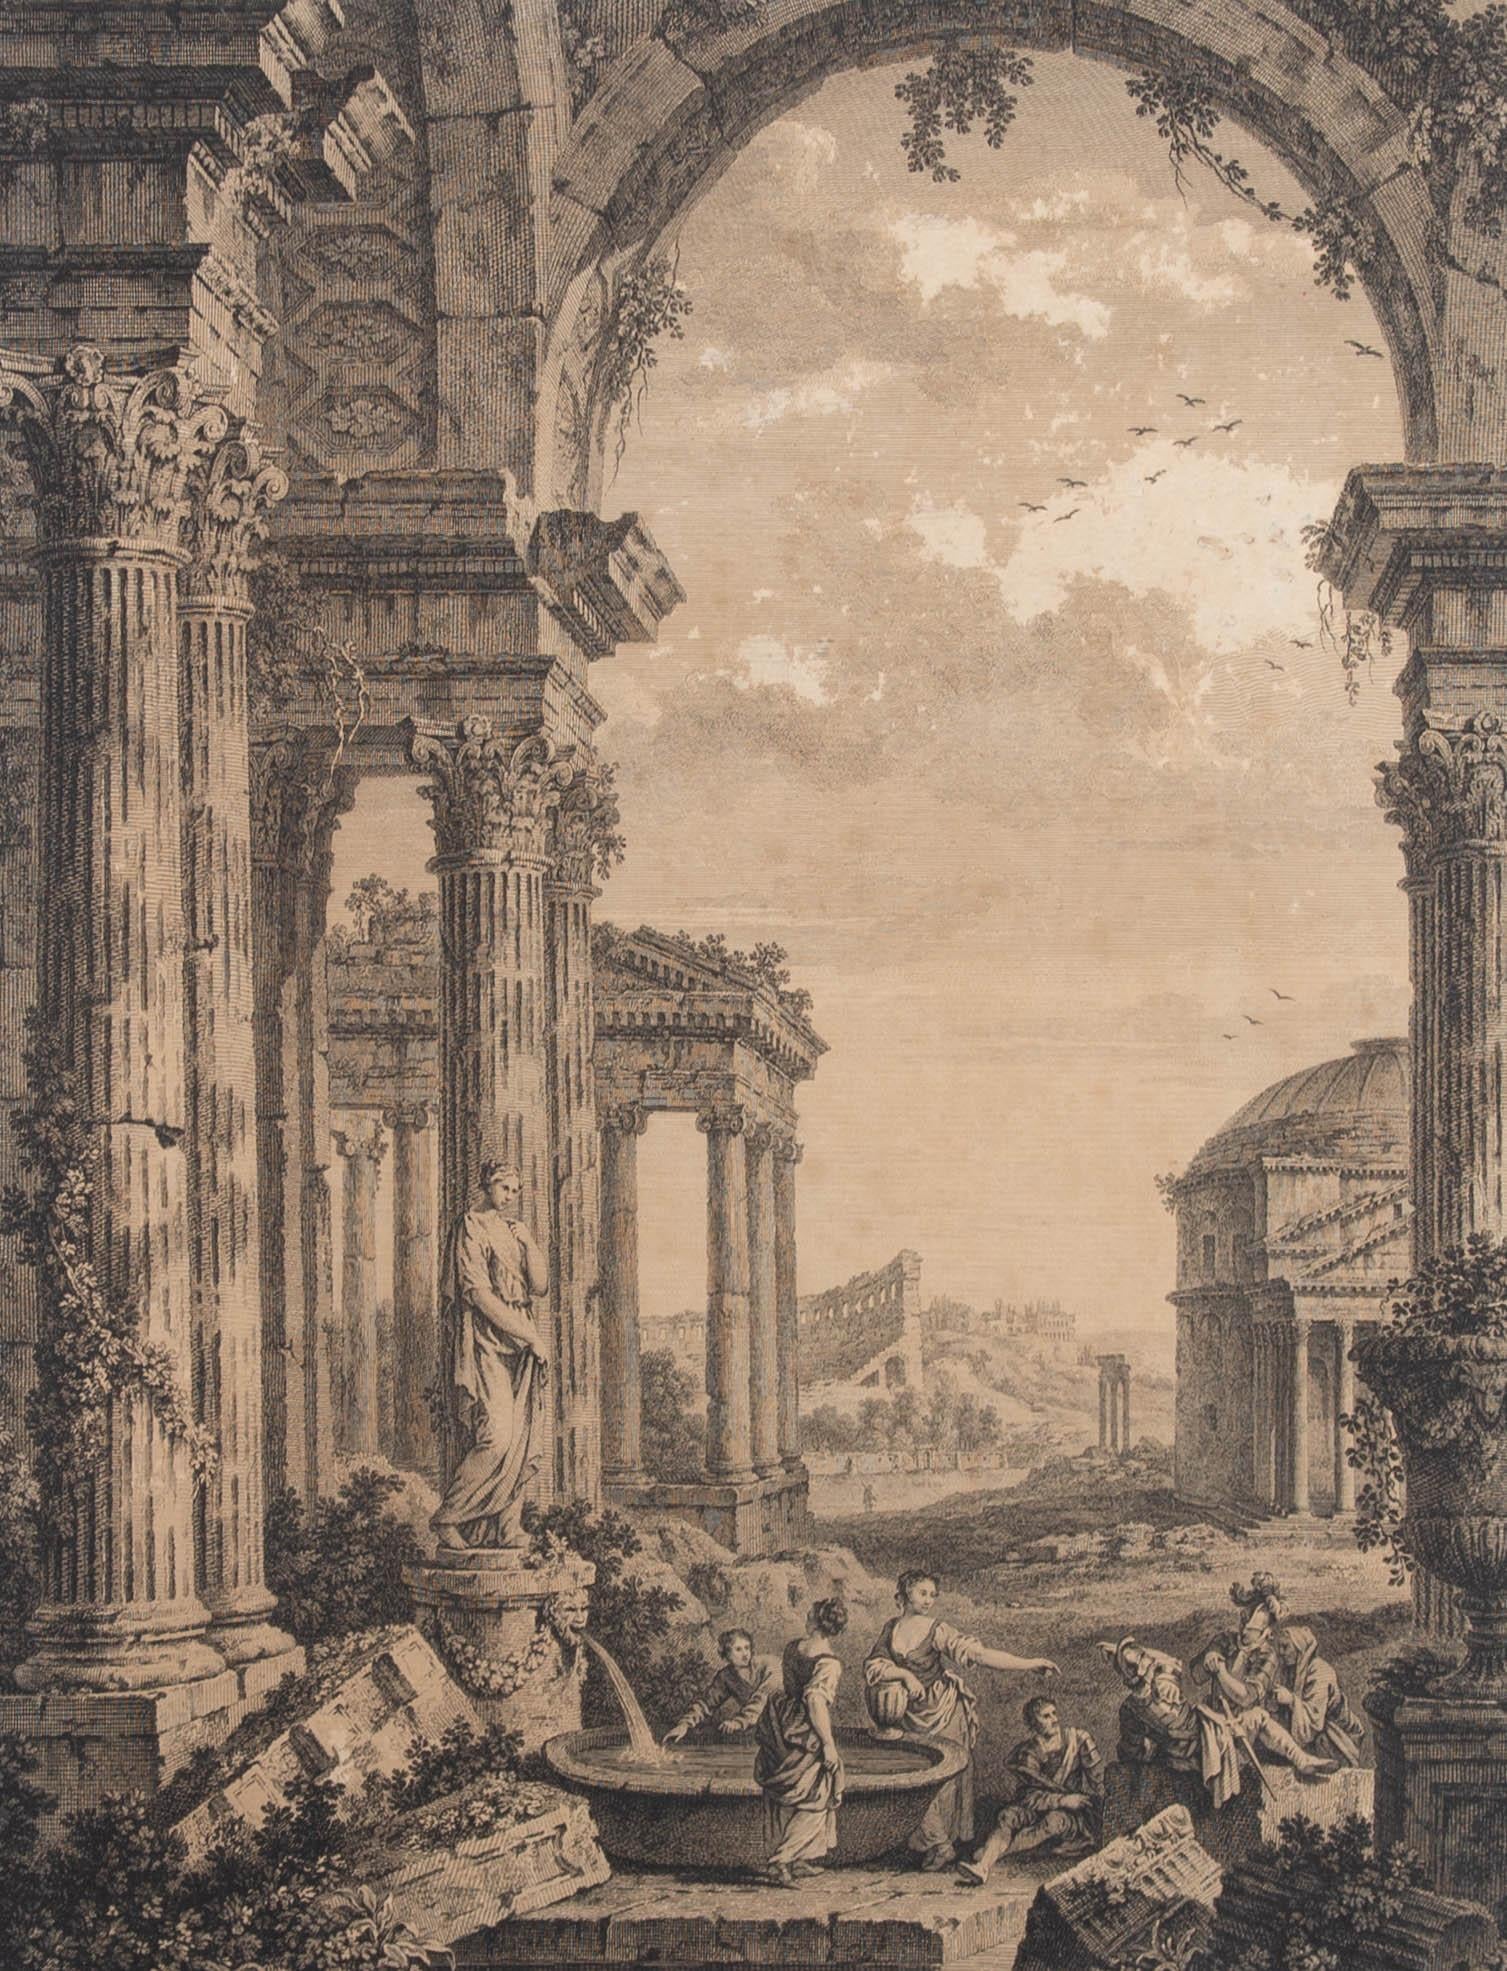 An engraving by Francois Vivares (1709-1780) after a capriccio by Giovanni Paolo Panini (1691-1765) depicting figures at a fountain in a Roman ruin with the Pantheon and Colosseum in the background. First published in 1755. There is an identical